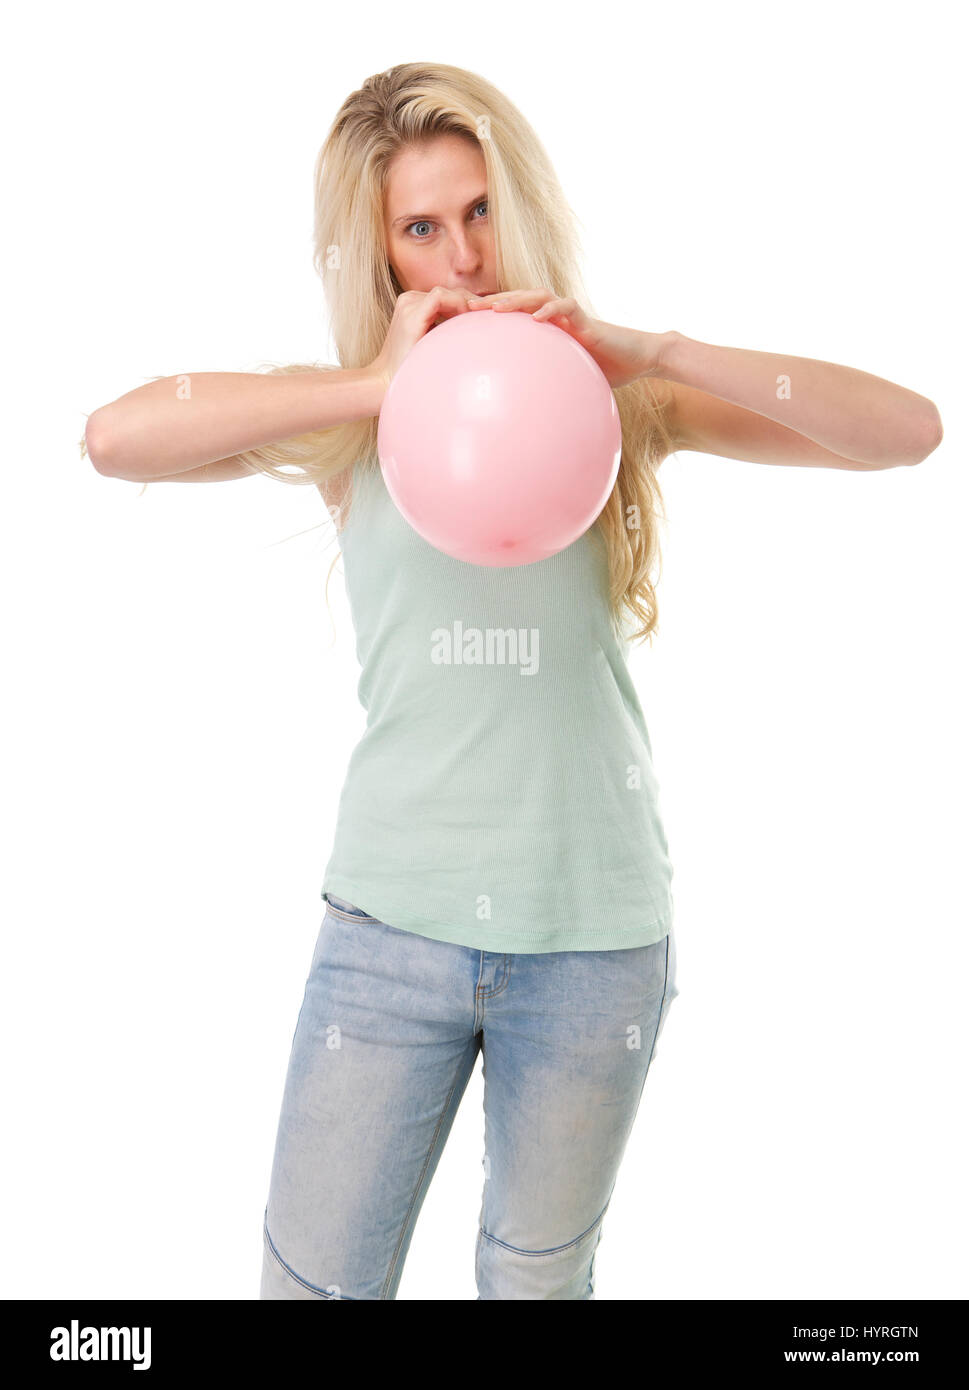 Close up portrait of a young blond woman inflating balloon on isolated white background Stock Photo